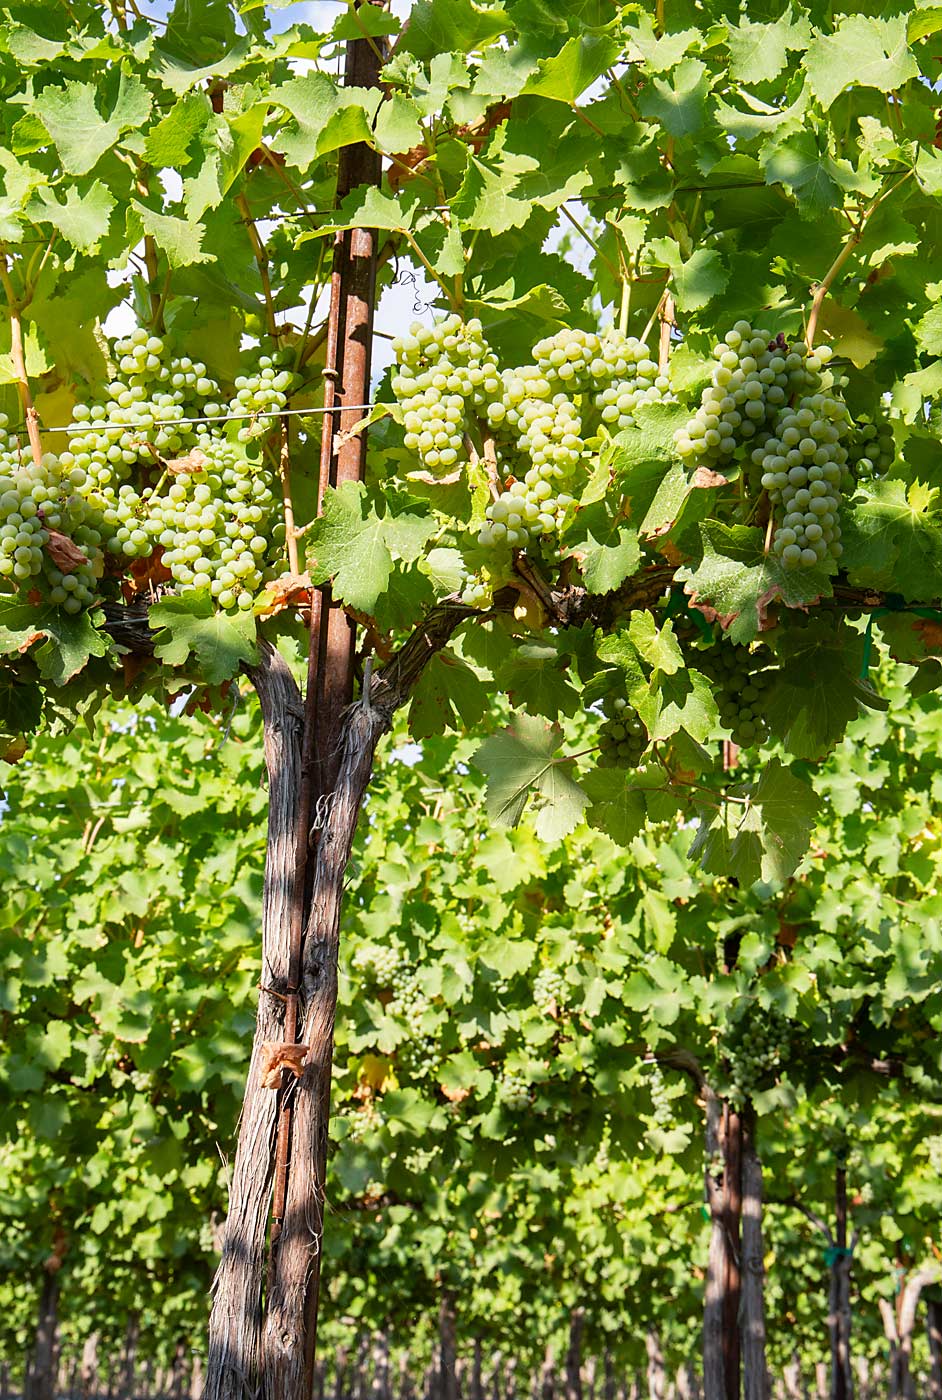 The row in the foreground has been deleafed, while neighboring rows behind it have not, one of the more obvious signs that Four Feathers manages this block of Sauvignon Blanc variably to meet the wishes of different clients. (Ross Courtney/Good Fruit Grower)